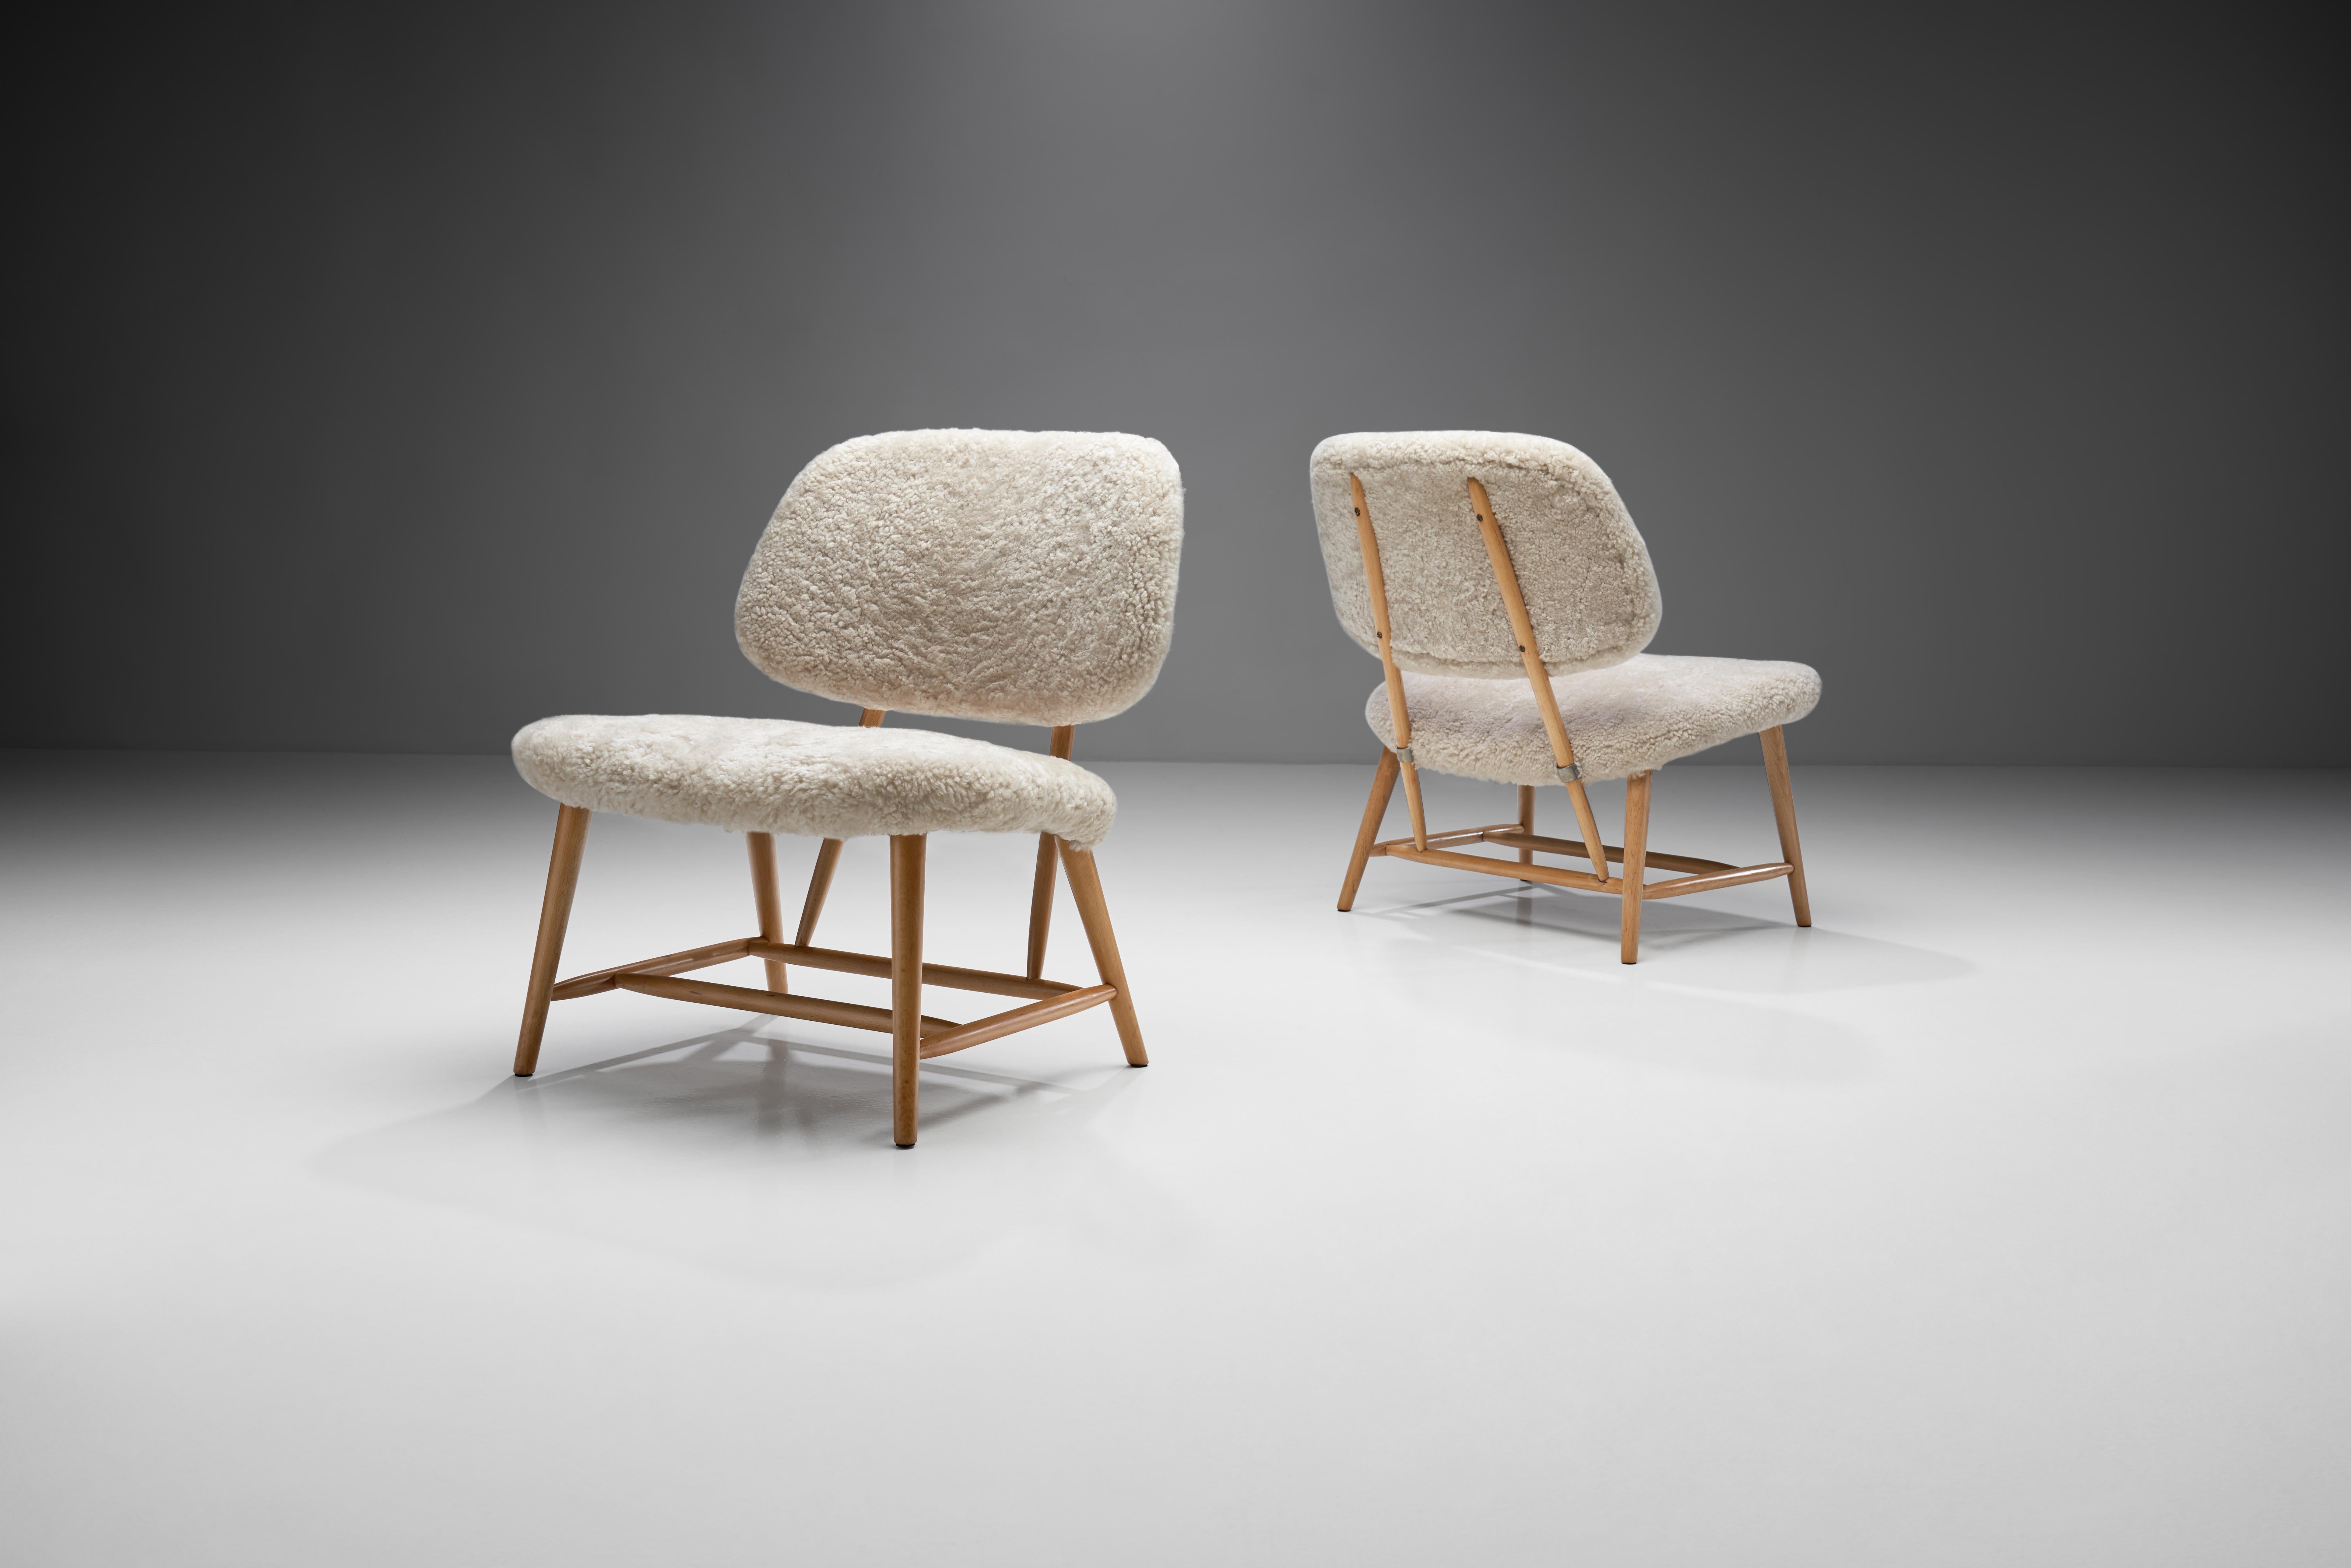 This pair of “TeVe Stolen” or “The TV chairs” was designed in 1953, during the most active period of Swedish furniture designer Alf Svensson. This chair is a piece that is typically designed in the Scandinavian Modern style.

The chairs’ simple